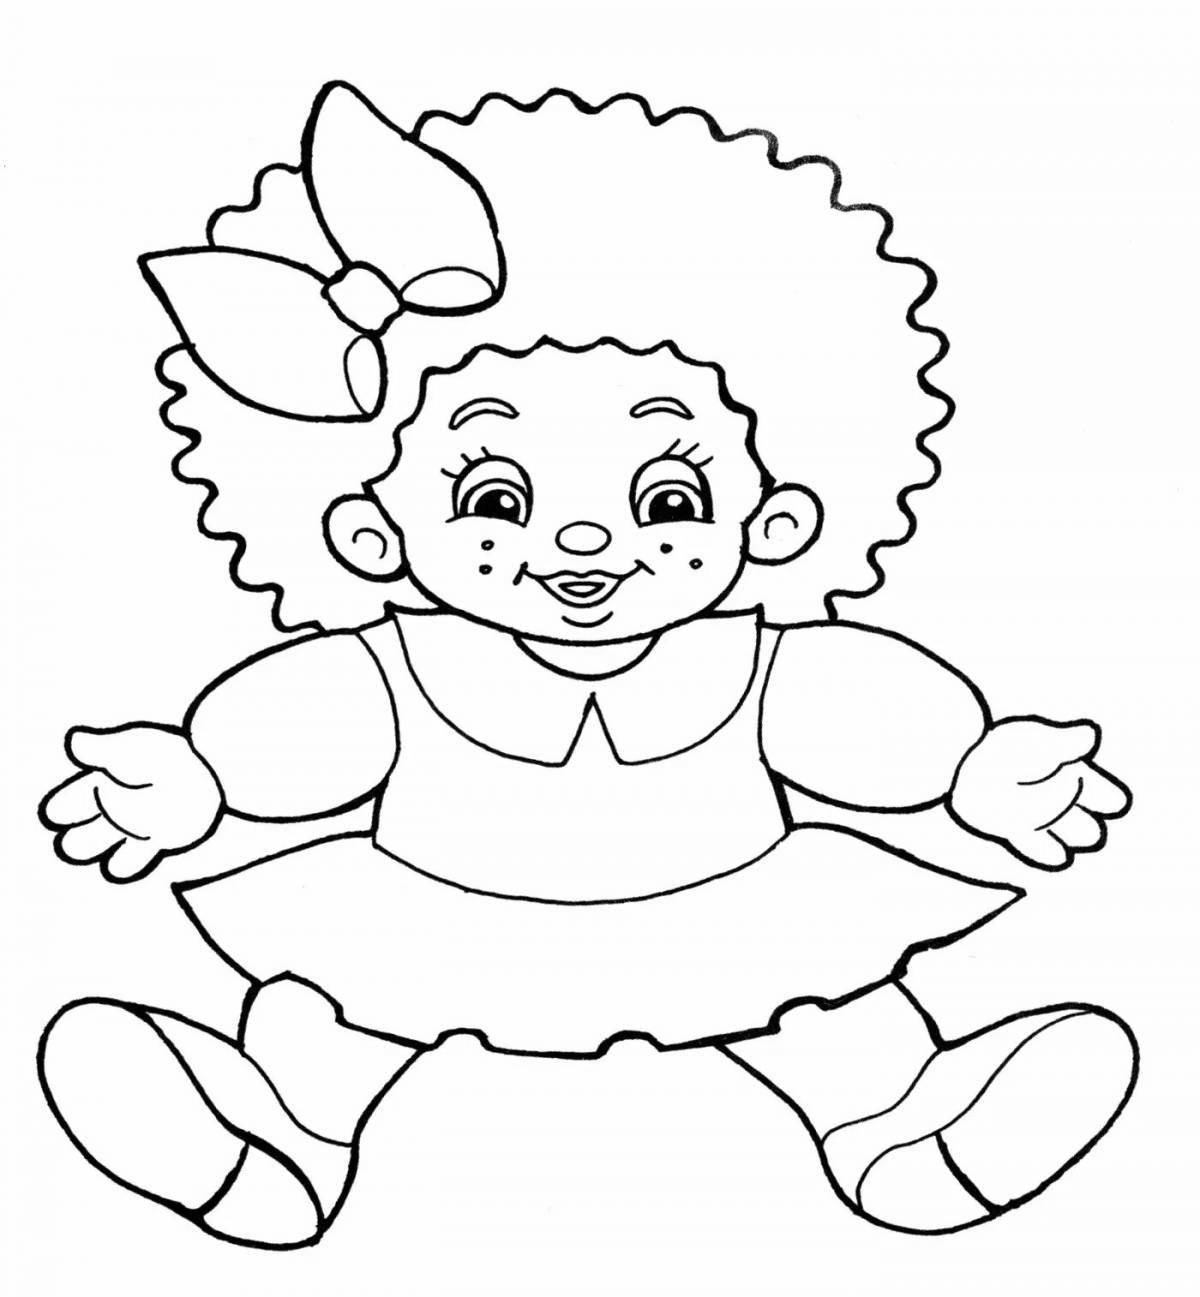 Coloring page wild dolly